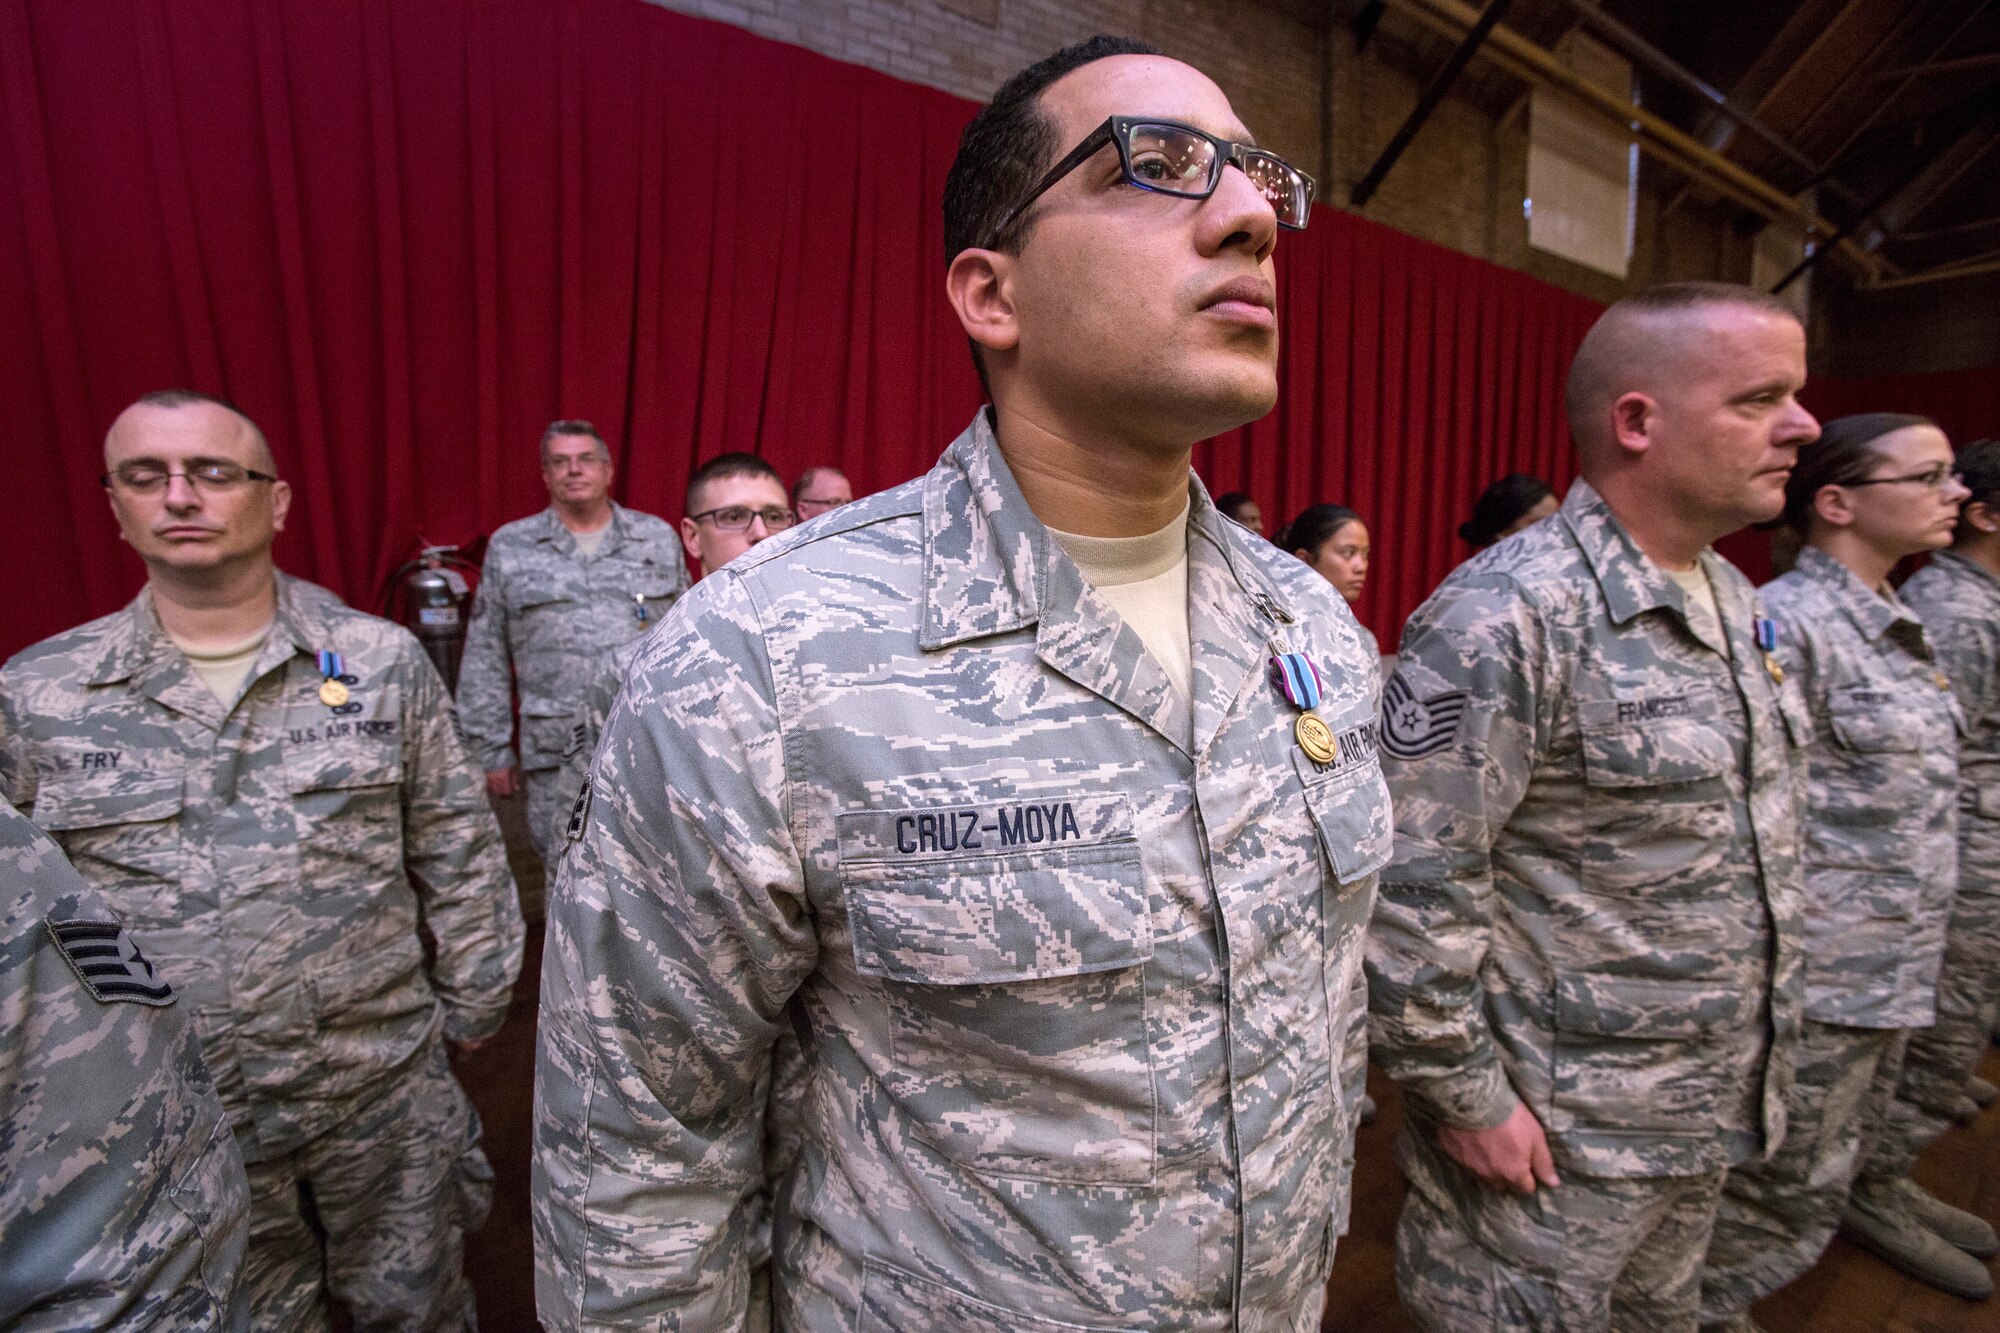 Senior Airman Willie Cruz-Moya, 108th Wing, along with 108th and 177th Fighter Wing Airmen stand at attention after receiving the Humanitarian Service Medal at an awards ceremony at the National Guard Armory in Lawrenceville, N.J., May 3, 2016. (U.S. Air National Guard photo by Master Sgt. Mark C. Olsen/Released)